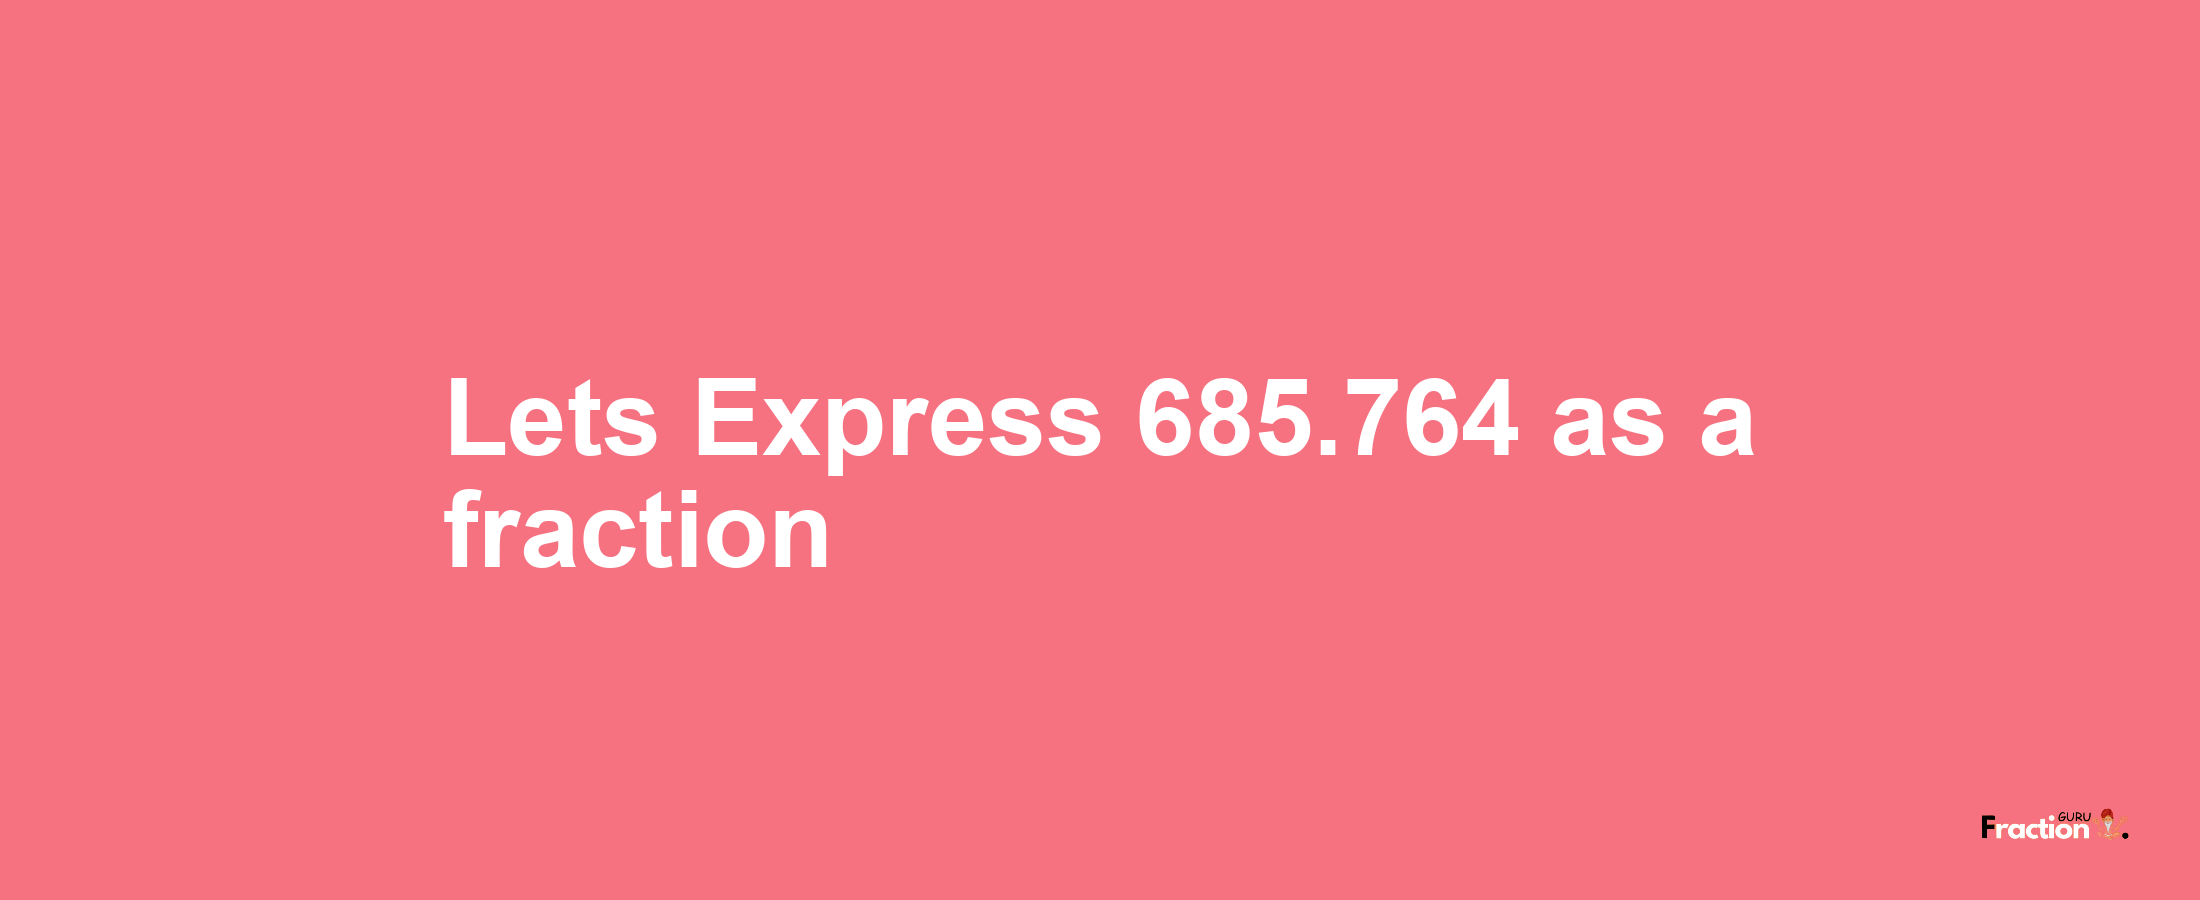 Lets Express 685.764 as afraction